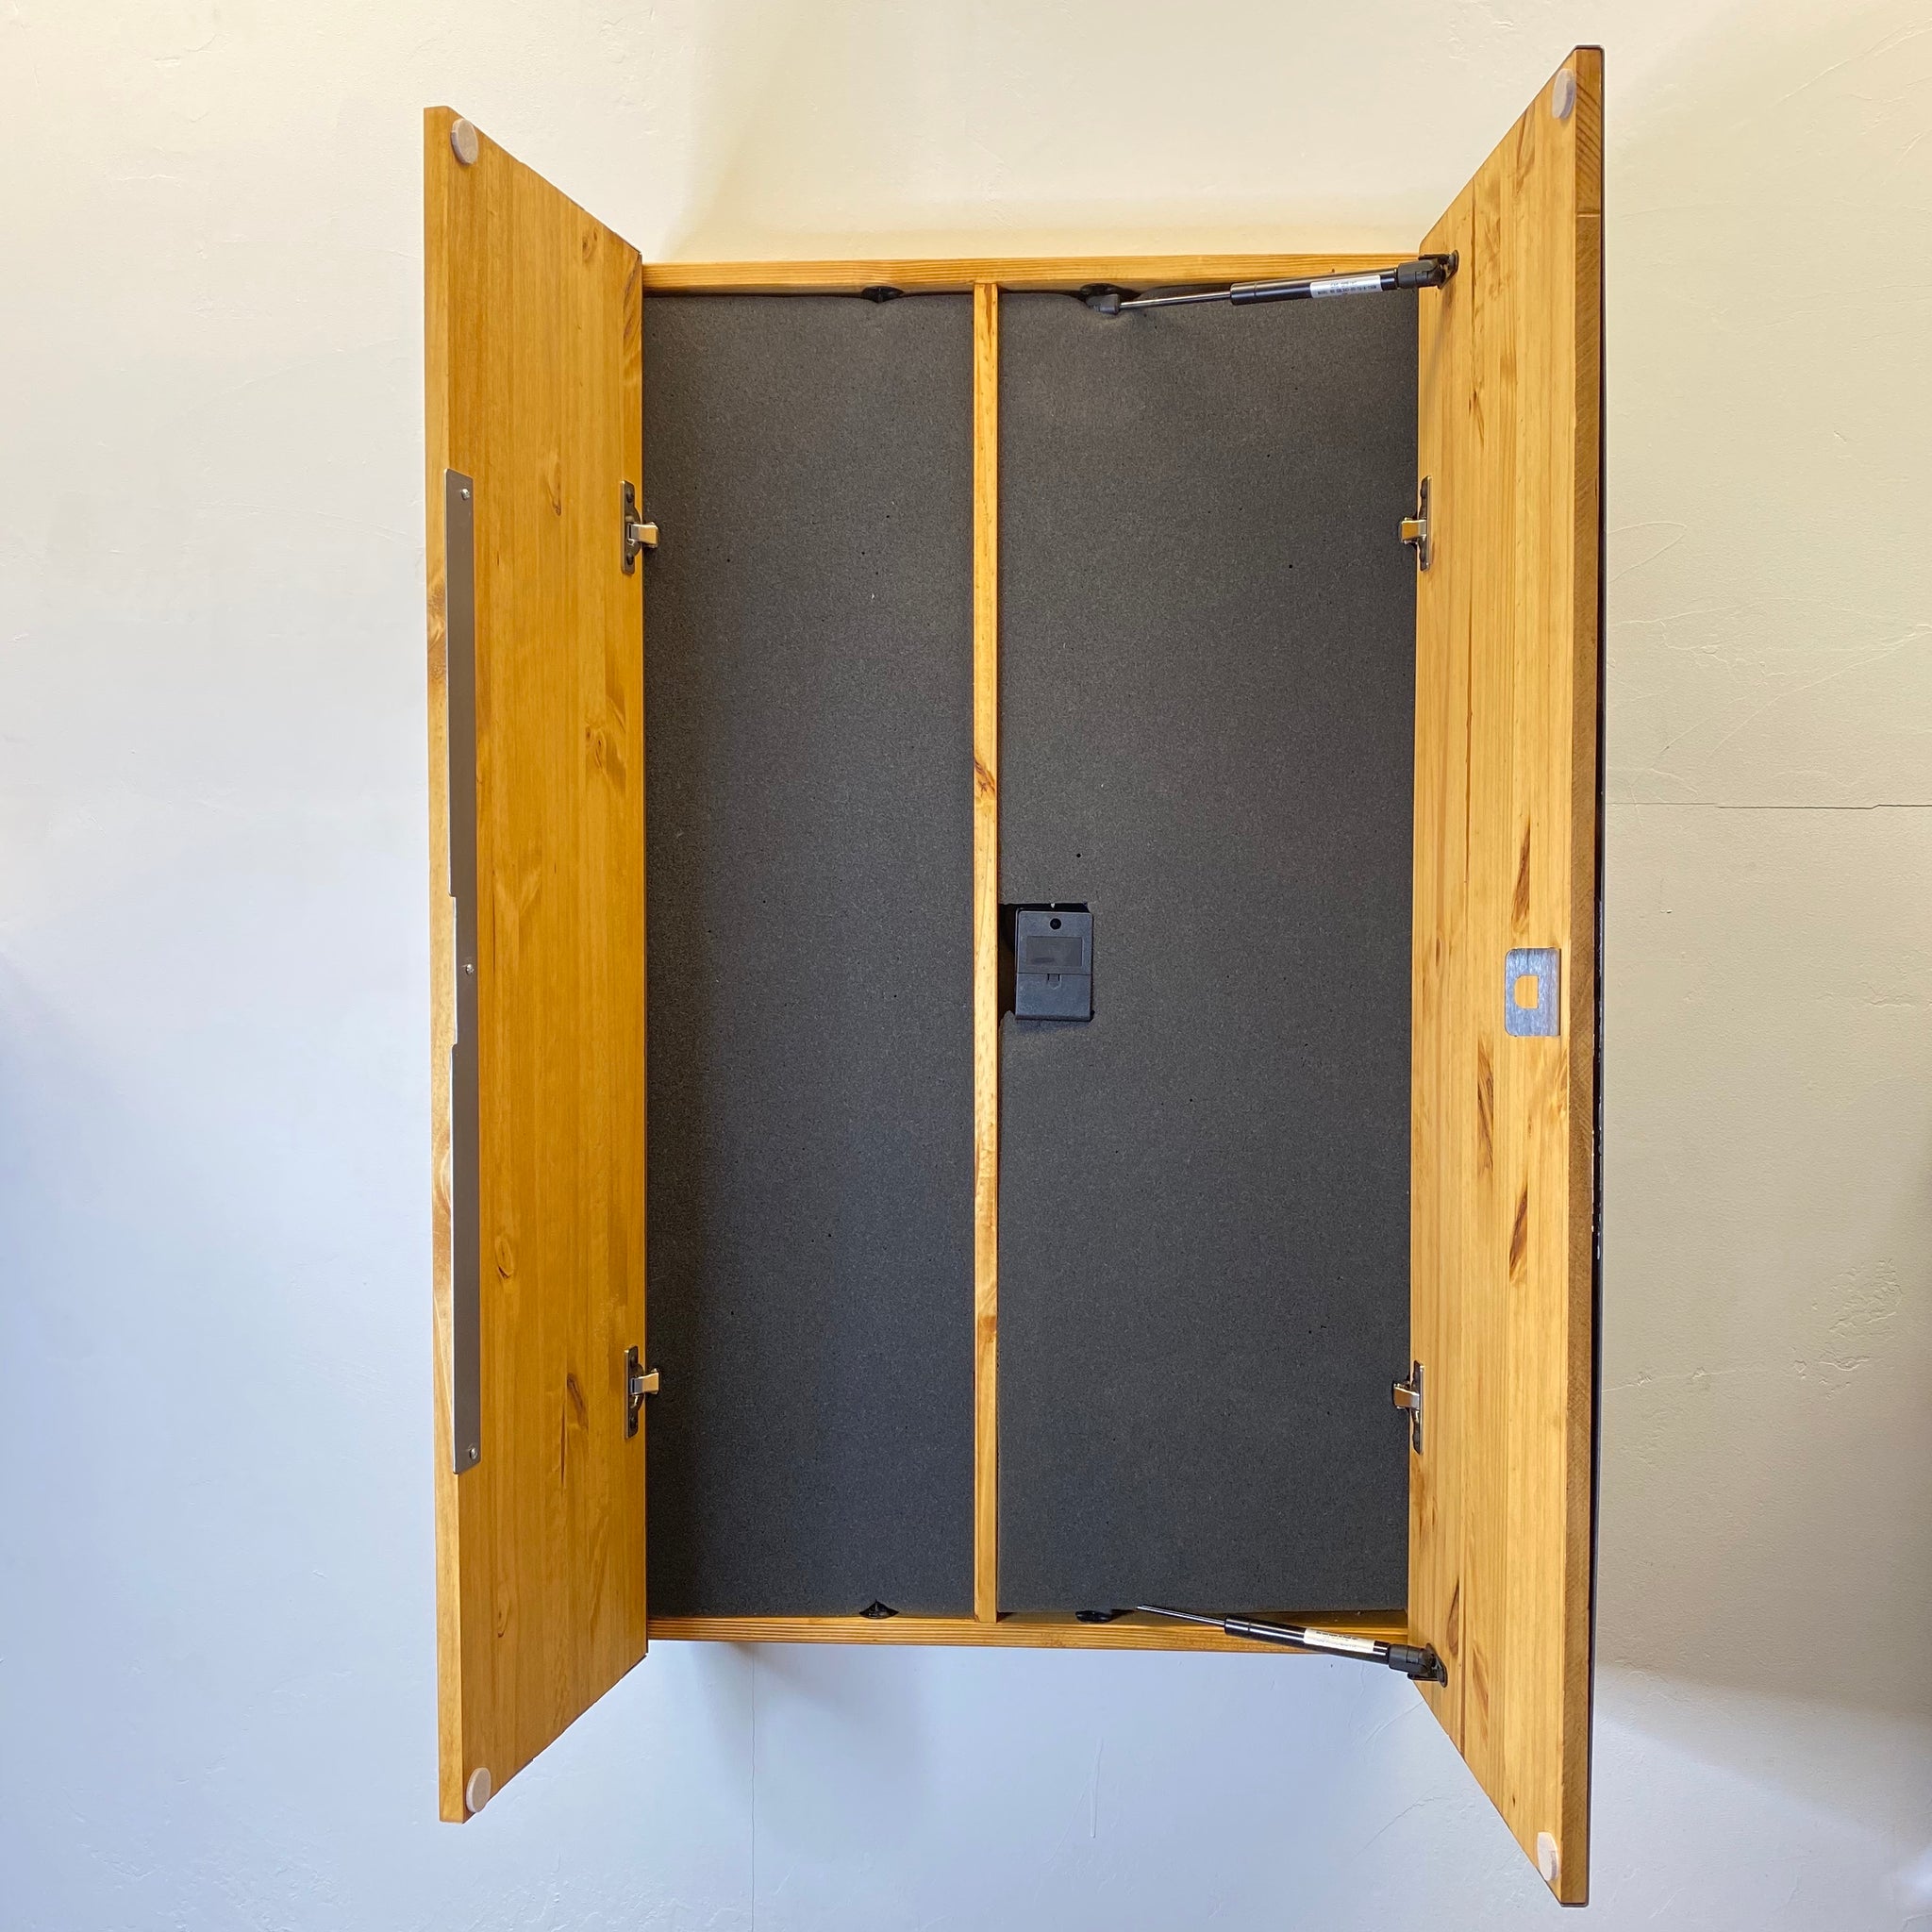 The "VERTICAL" Freedom Cabinet